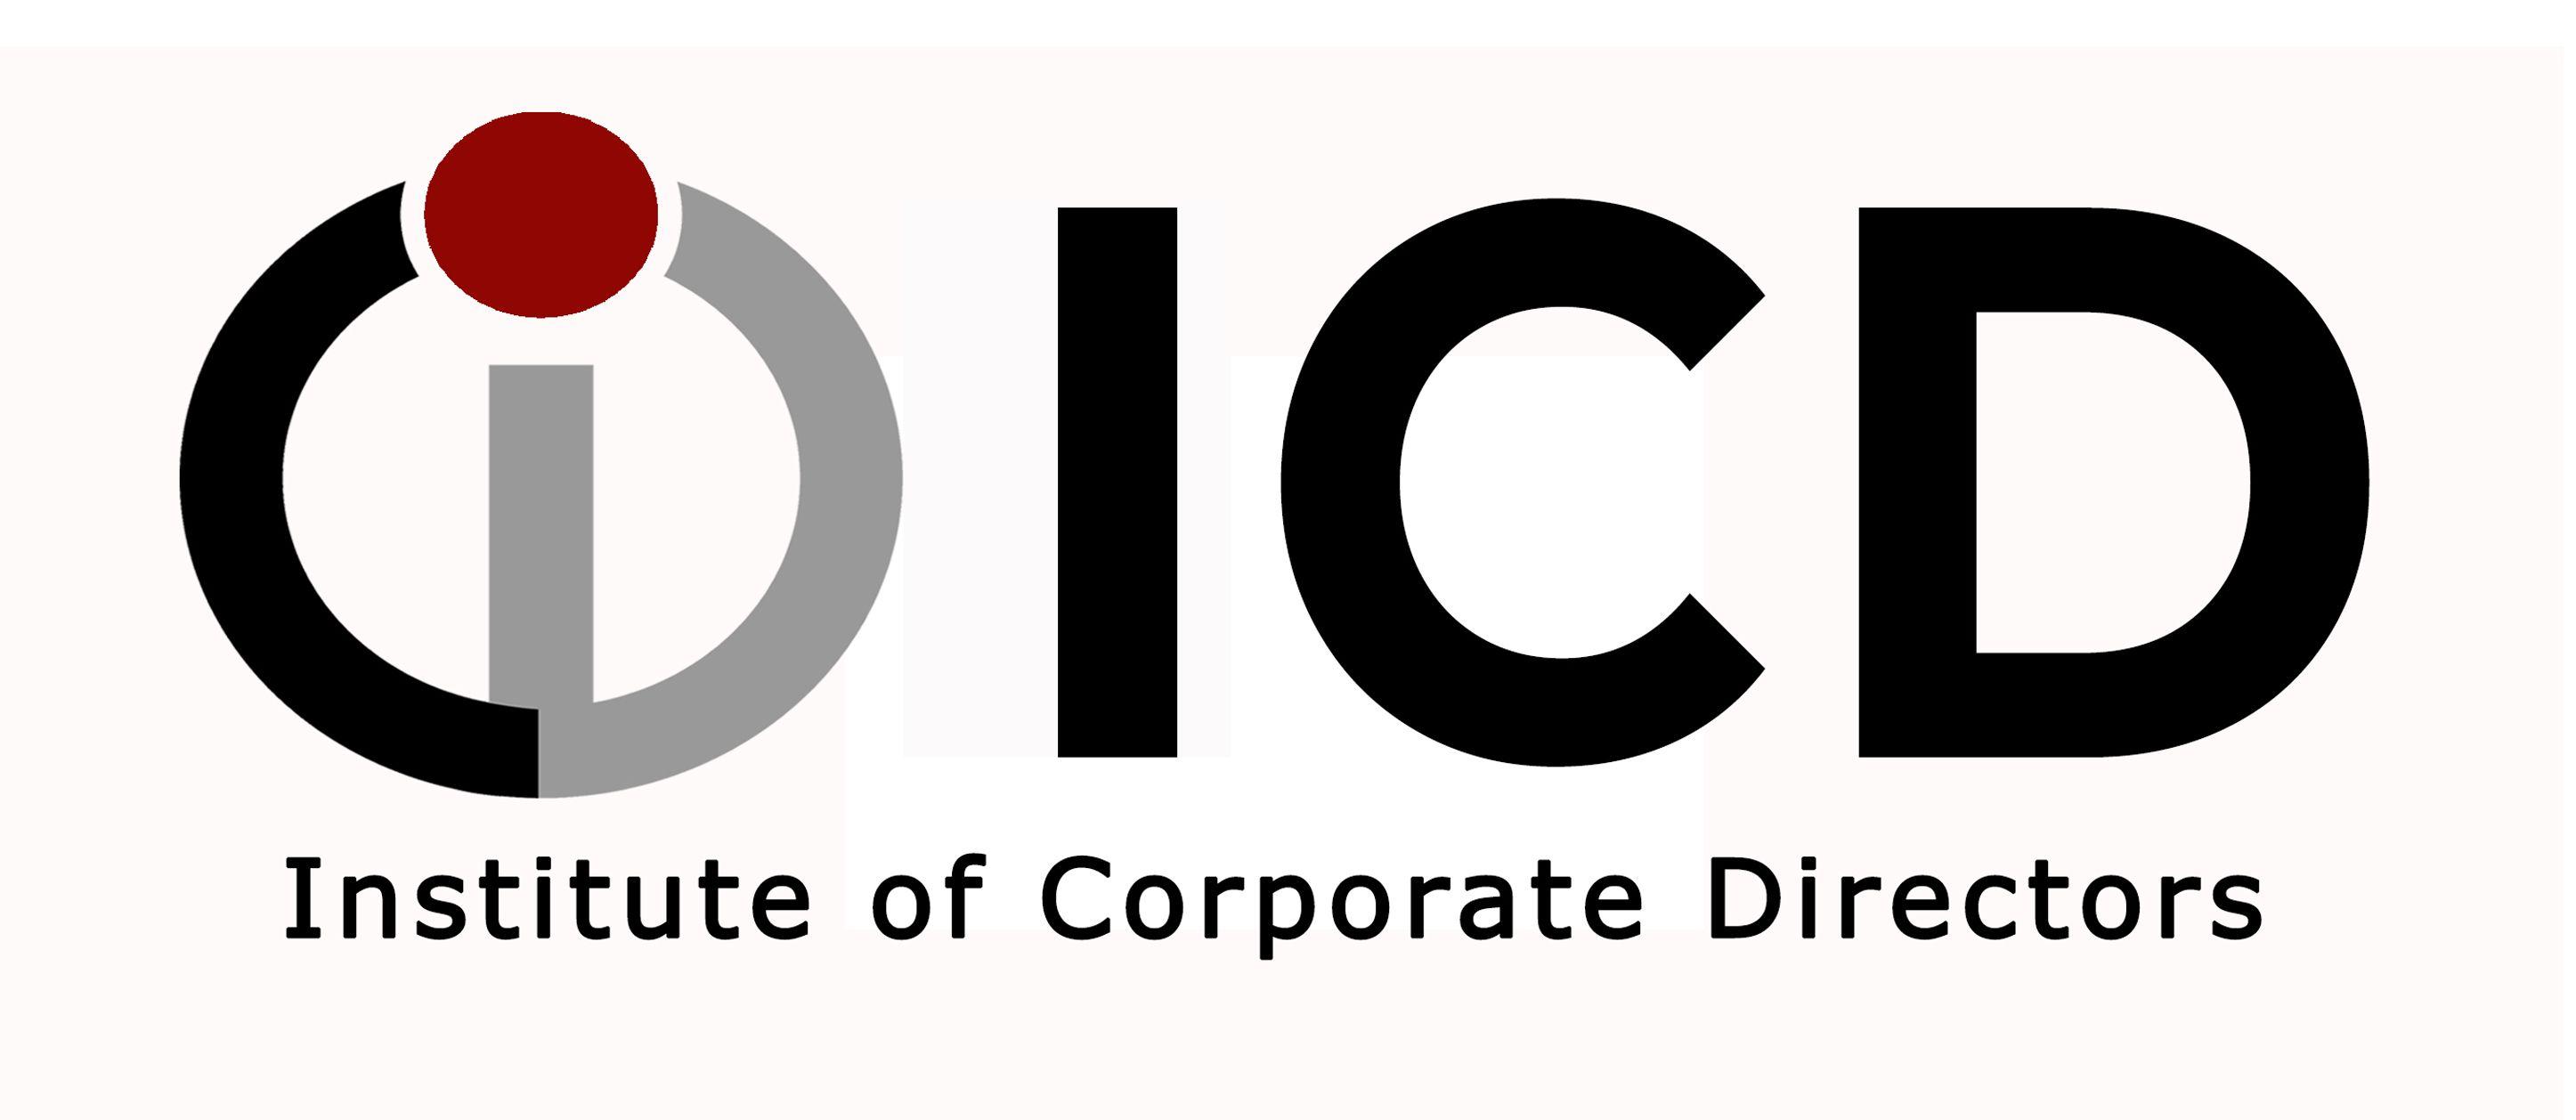 The Institute Logo - ICD